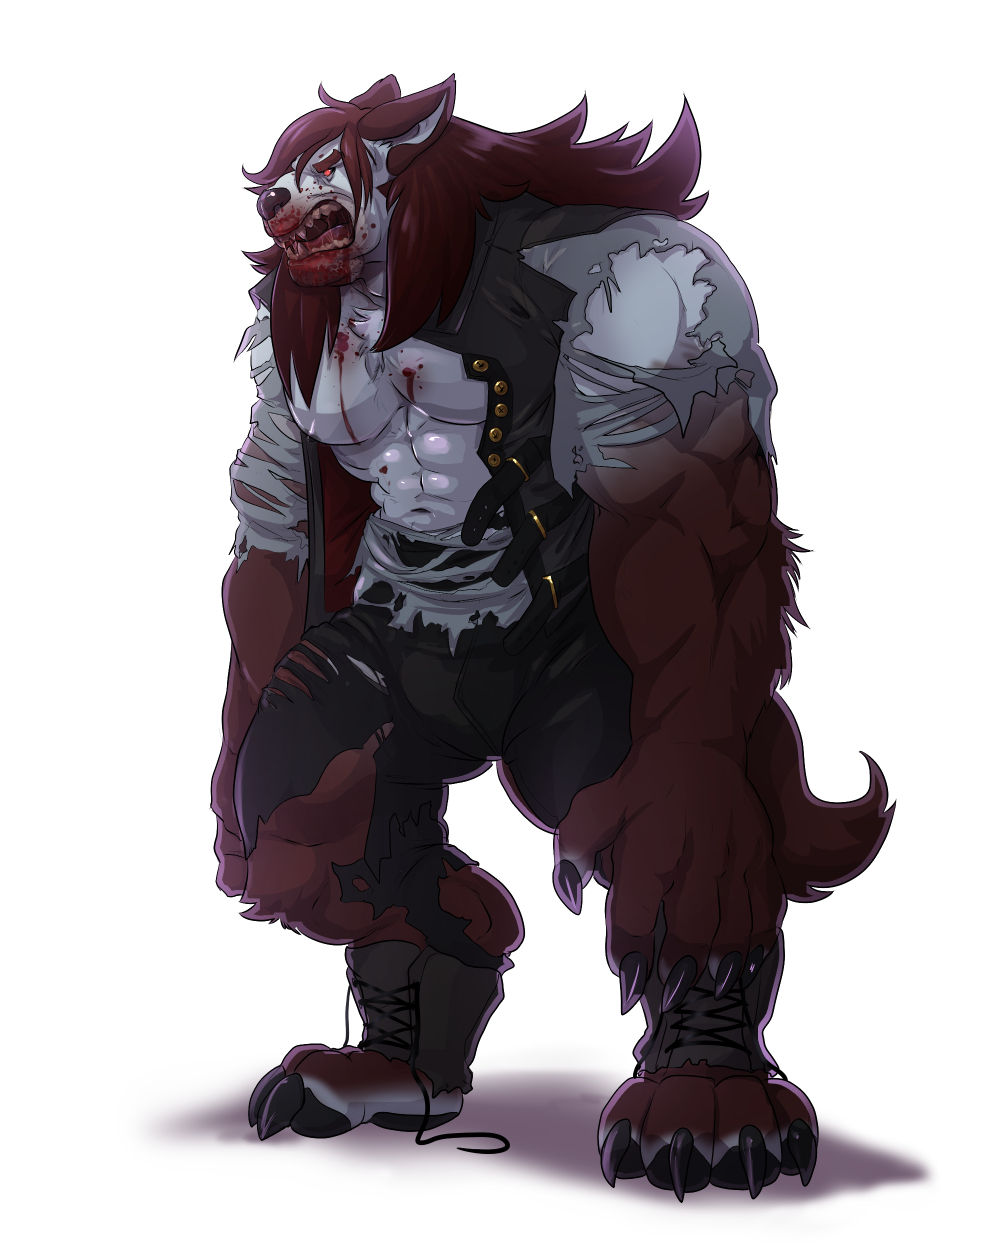 Werewolf commission by Benzy -- Fur Affinity [dot] net